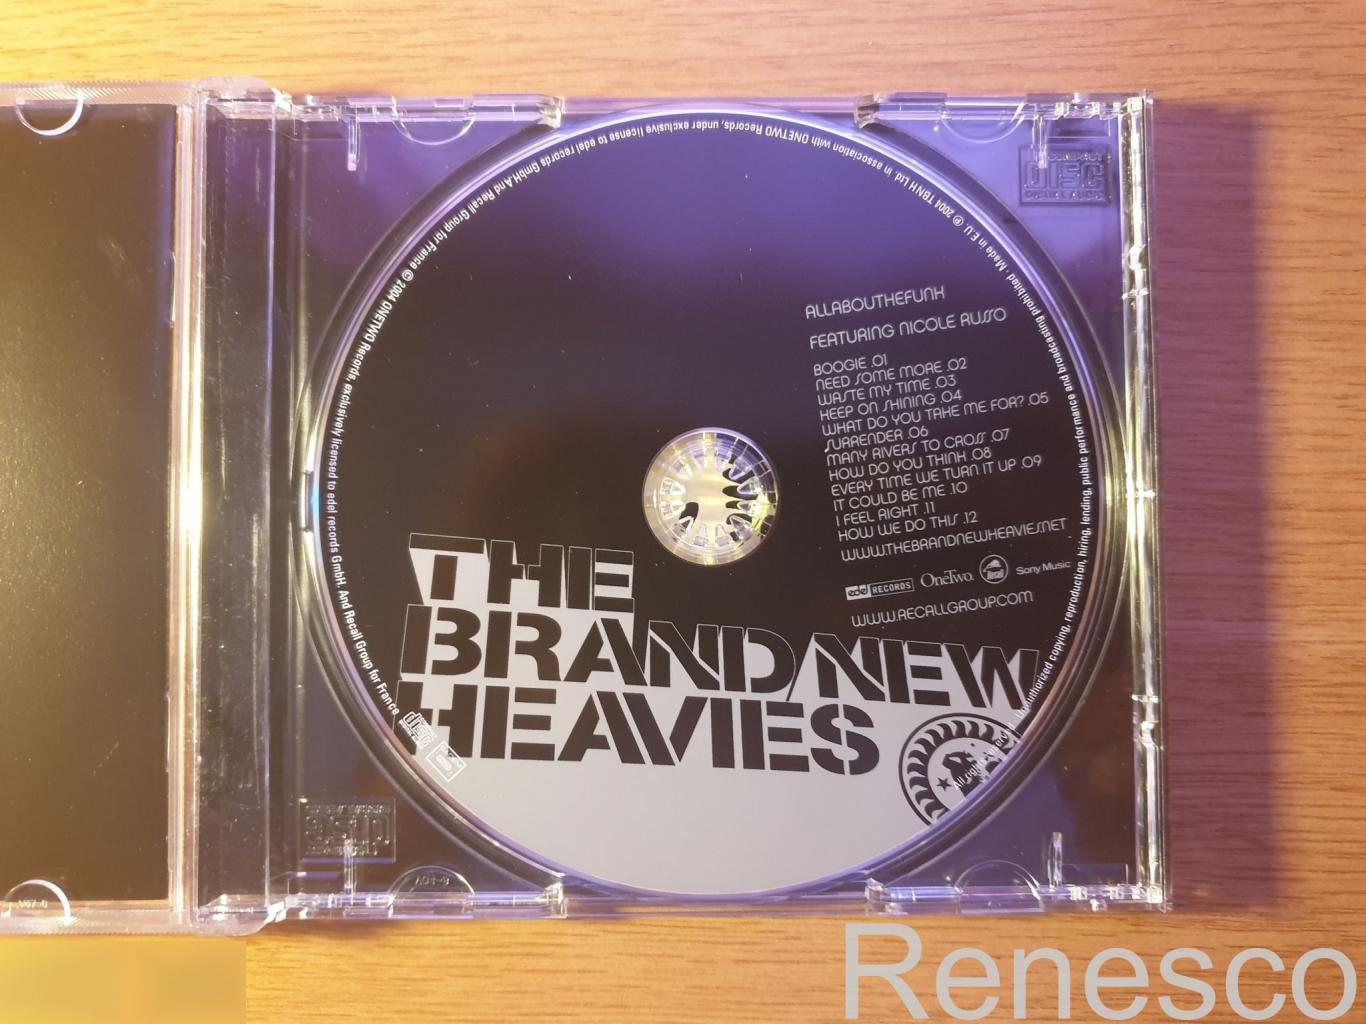 (CD) The Brand New Heavies Featuring Nicole Russo ?– Allabouthefunk (2004) (Fran 4